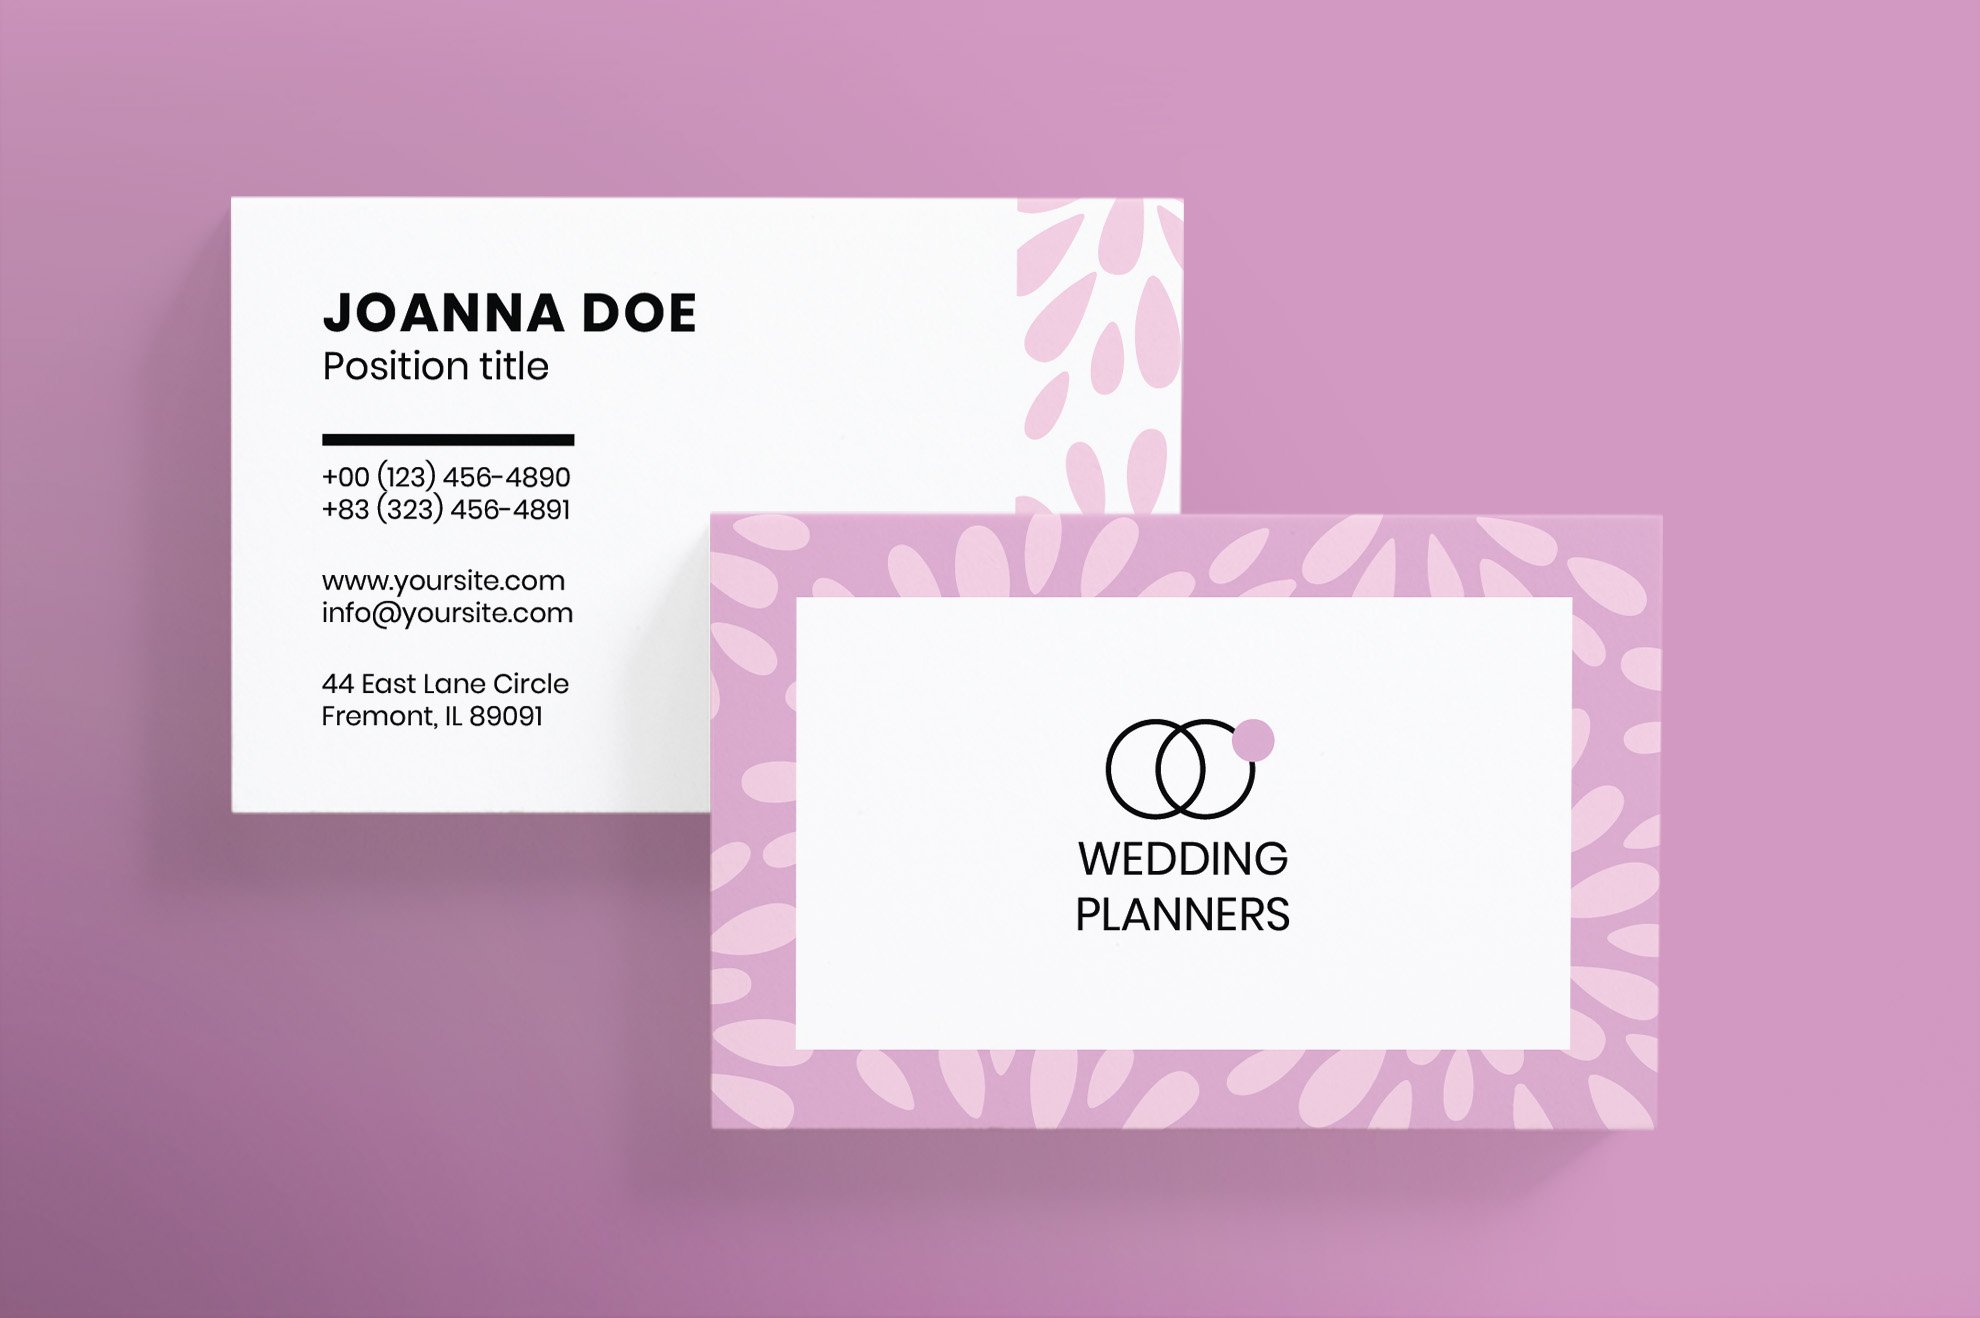 Business card in pink.